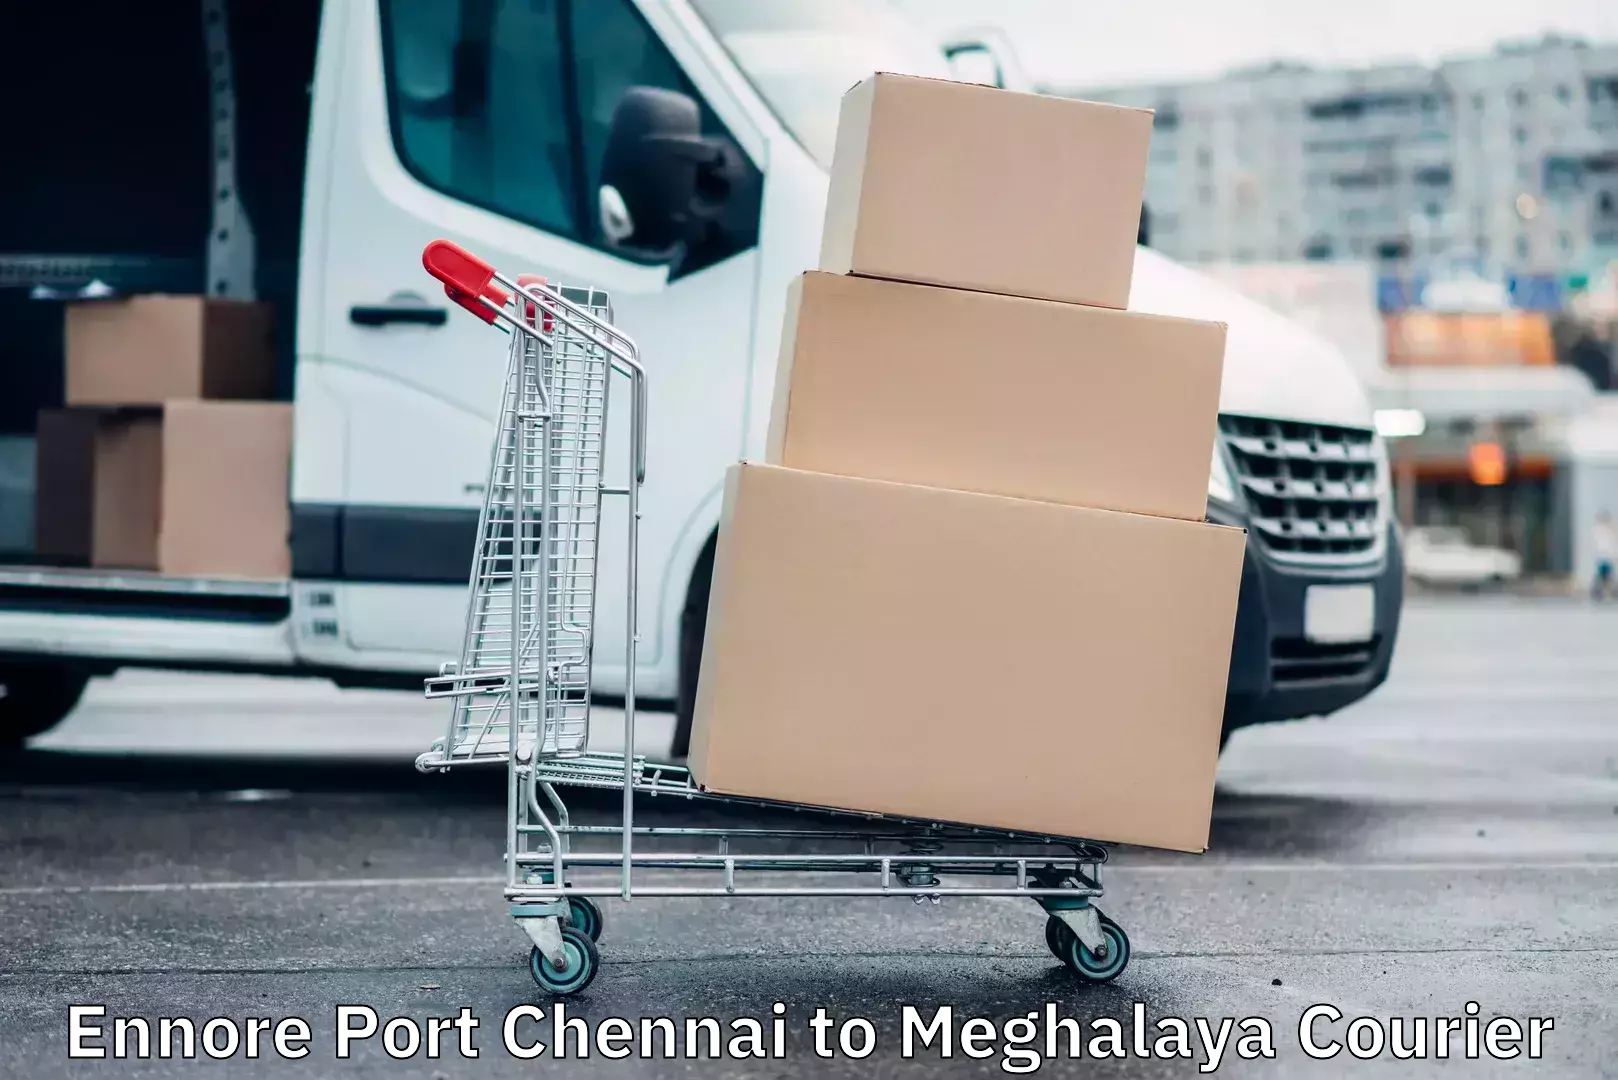 Tailored delivery services Ennore Port Chennai to Cherrapunji